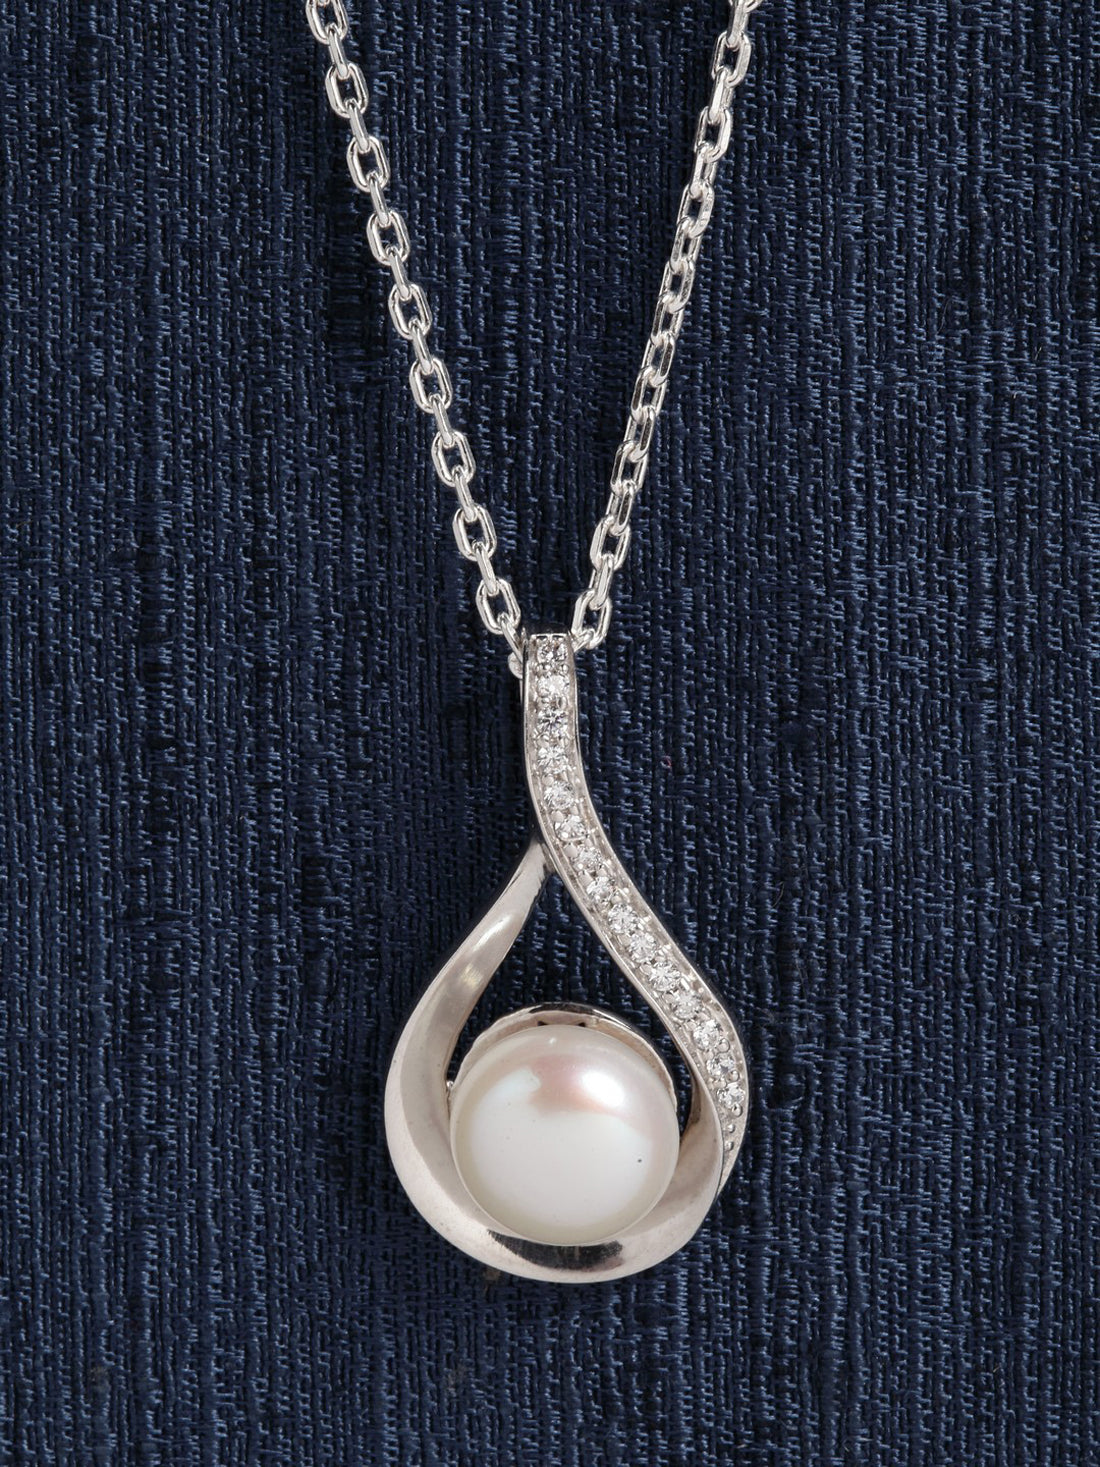 14k White Gold Crown Cultured Pearl Necklace with Original Case